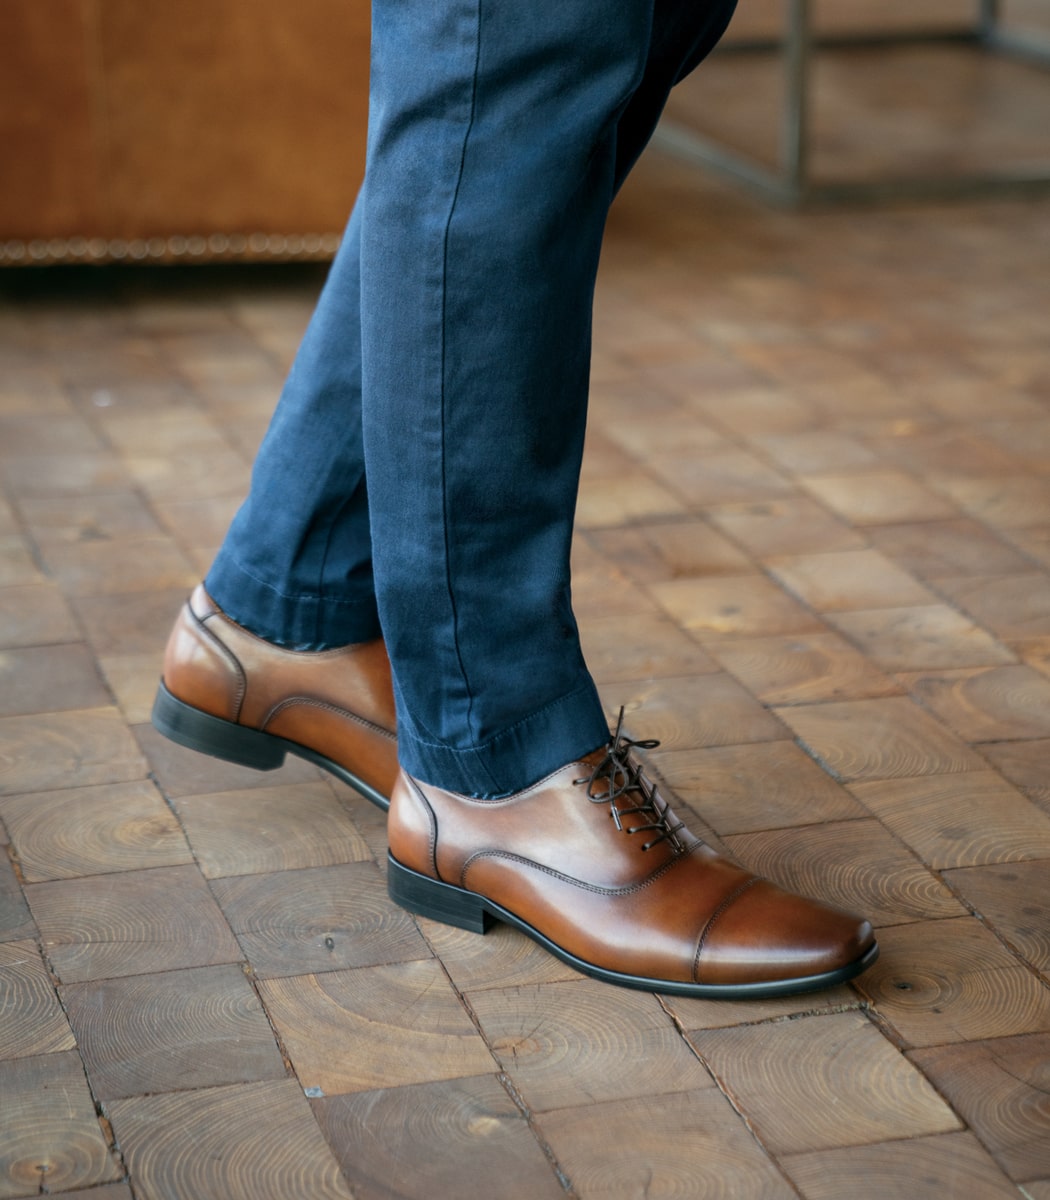 The featured image is a man wearing the Midtown Cap Toe Oxford in Cognac.